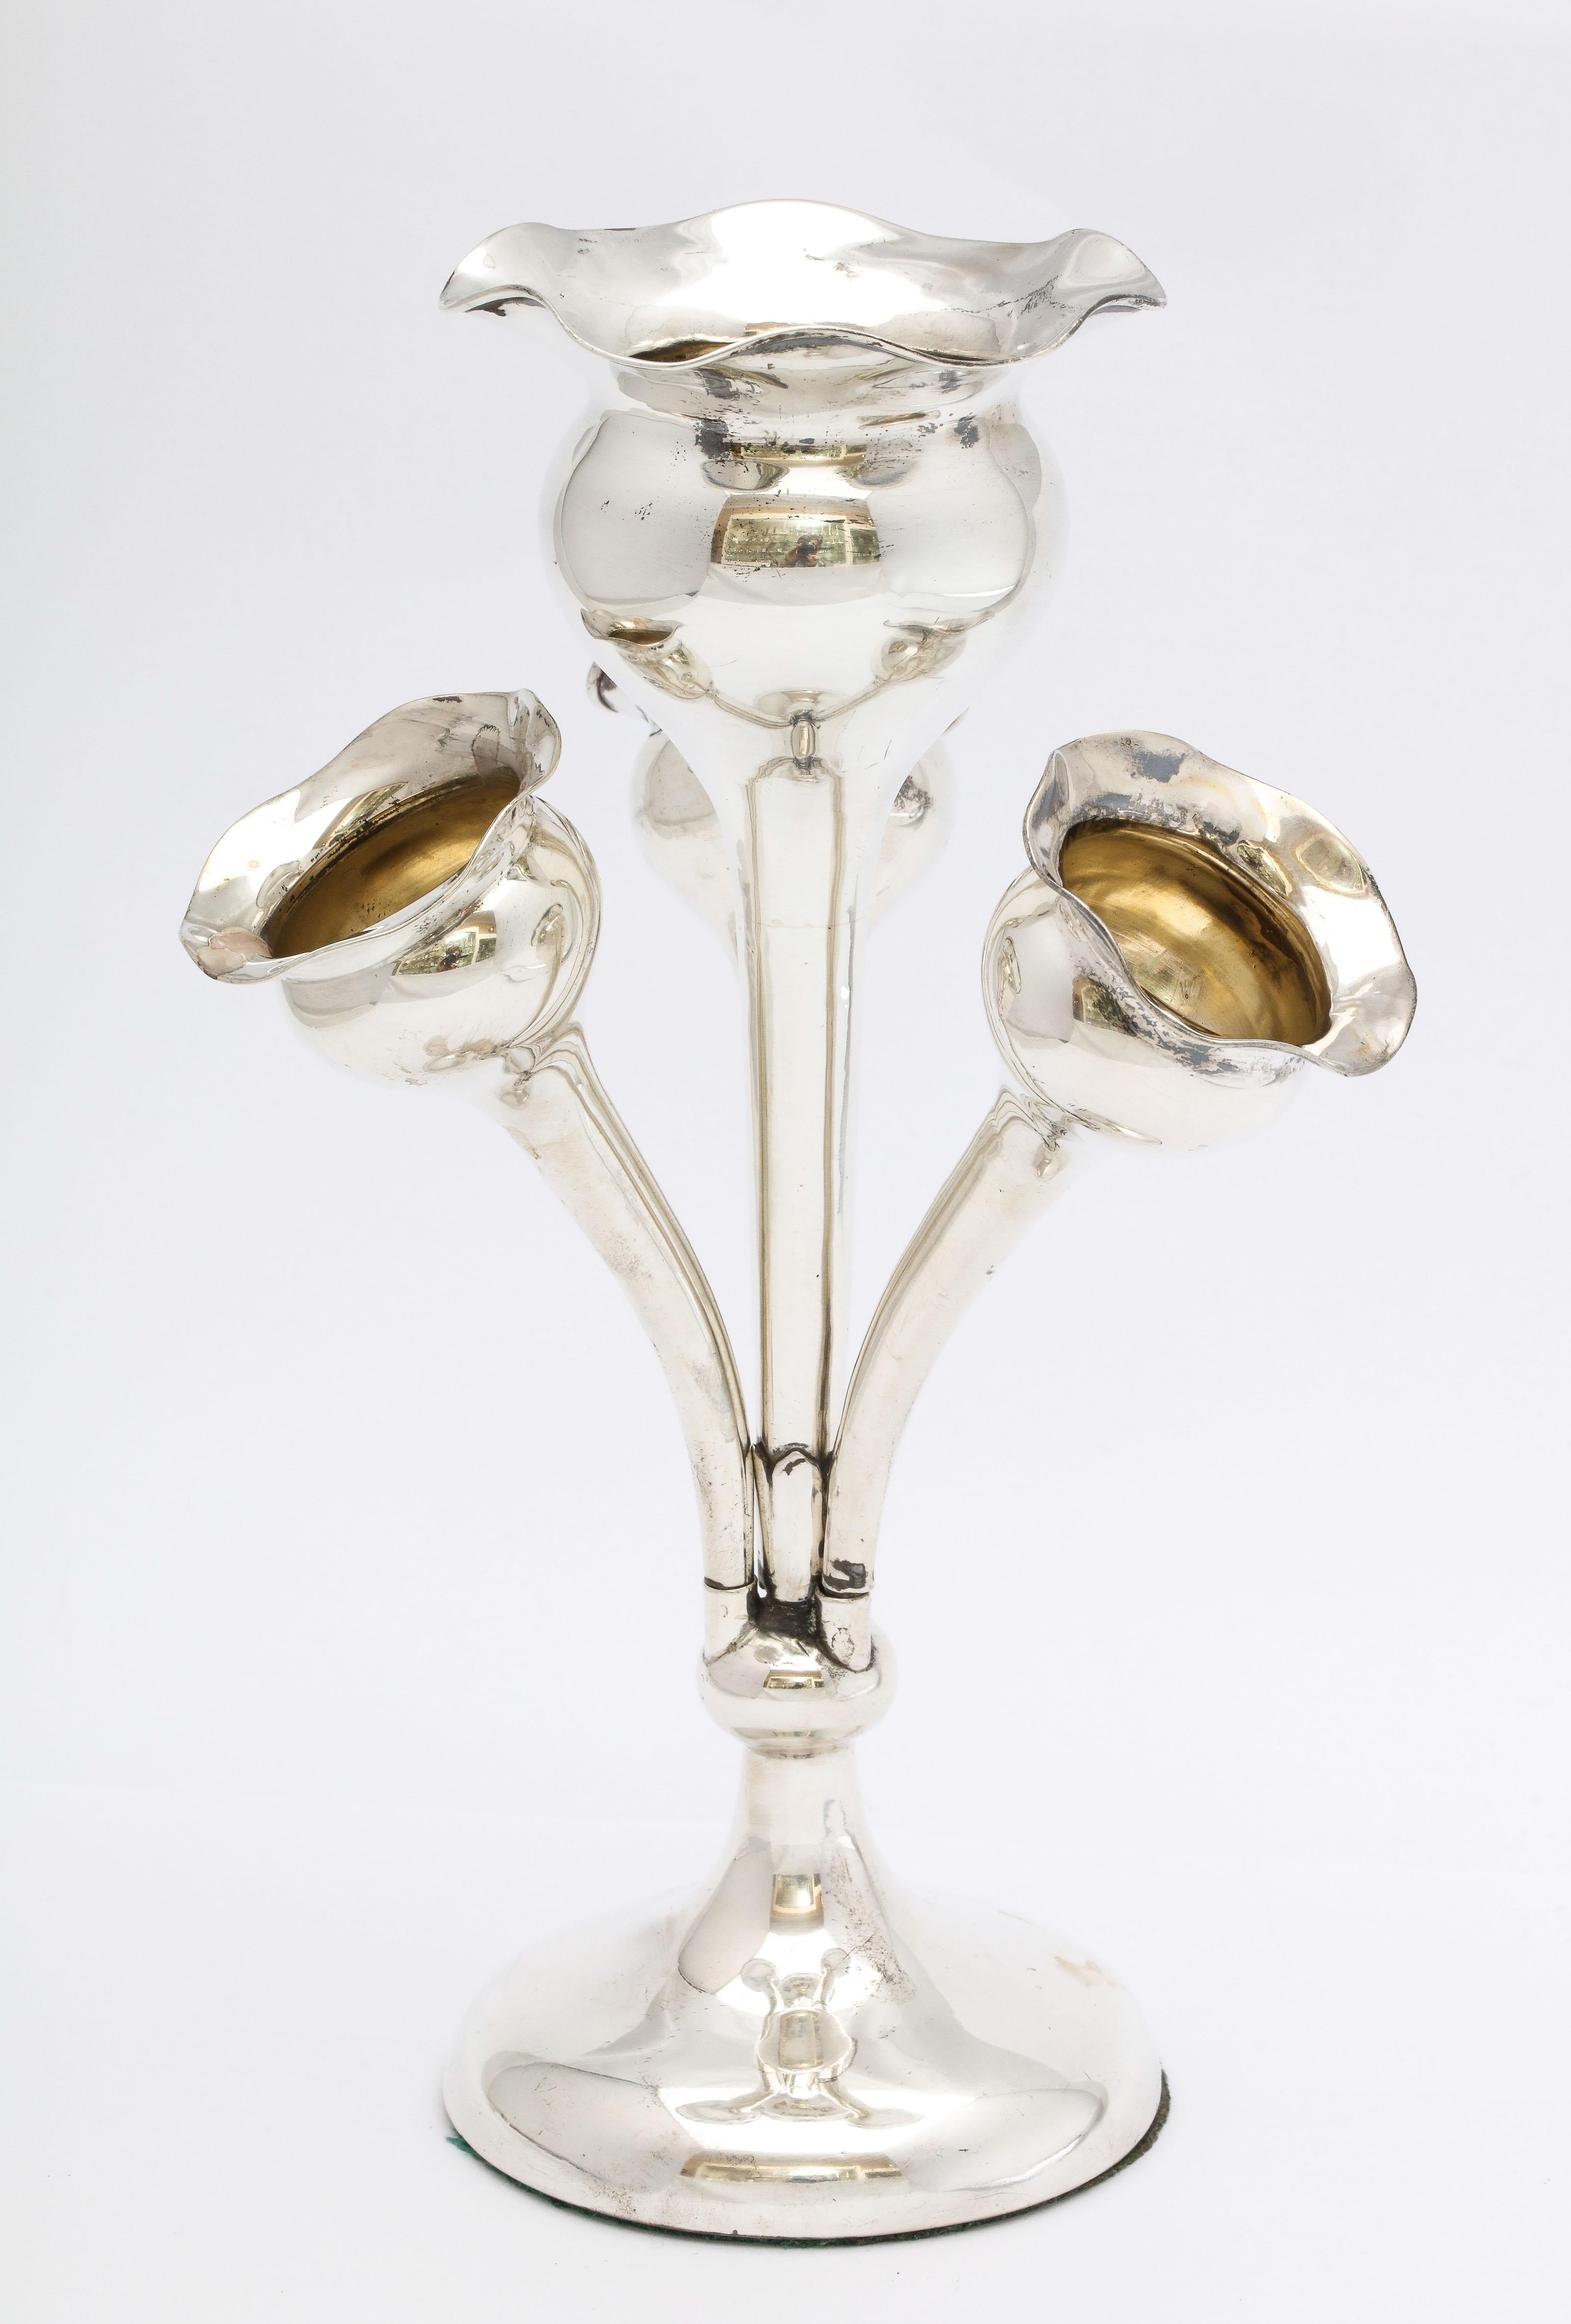 Lovely Edwardian, sterling silver epergne, Birmingham, England, 1910. Three of the flower - form vases are removable. Measures 7 1/2 inches high (at highest point) x 5 1/4 inches across (from smaller vase to smaller vase) x 2 3/4 inches diameter